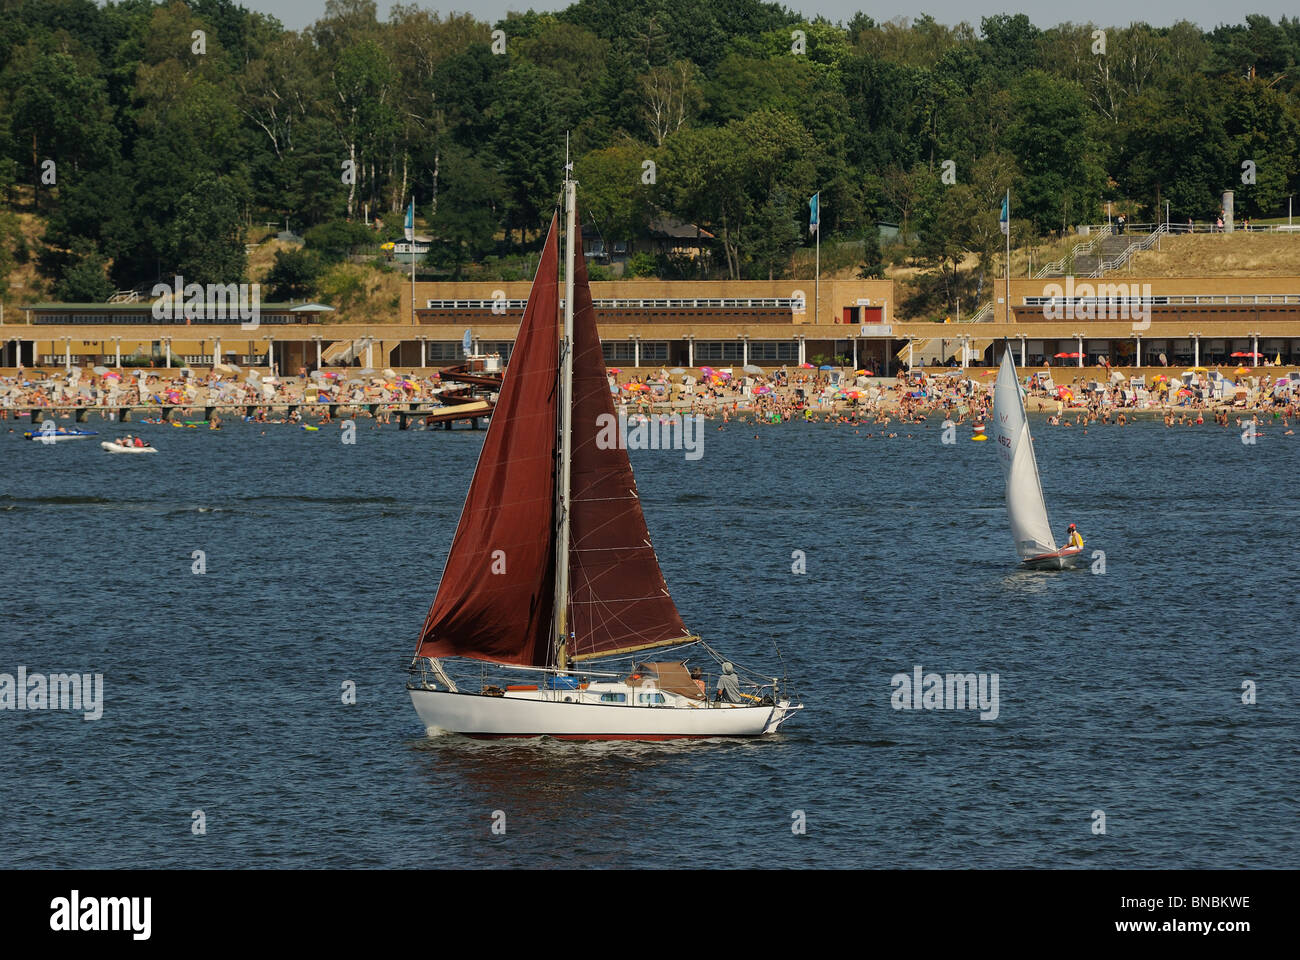 Boats sailing in front of Strandbad Wannsee lido. Am Grossen Wannsee lake, Zehlendorf district, Berlin, Germany, Europe. Stock Photo